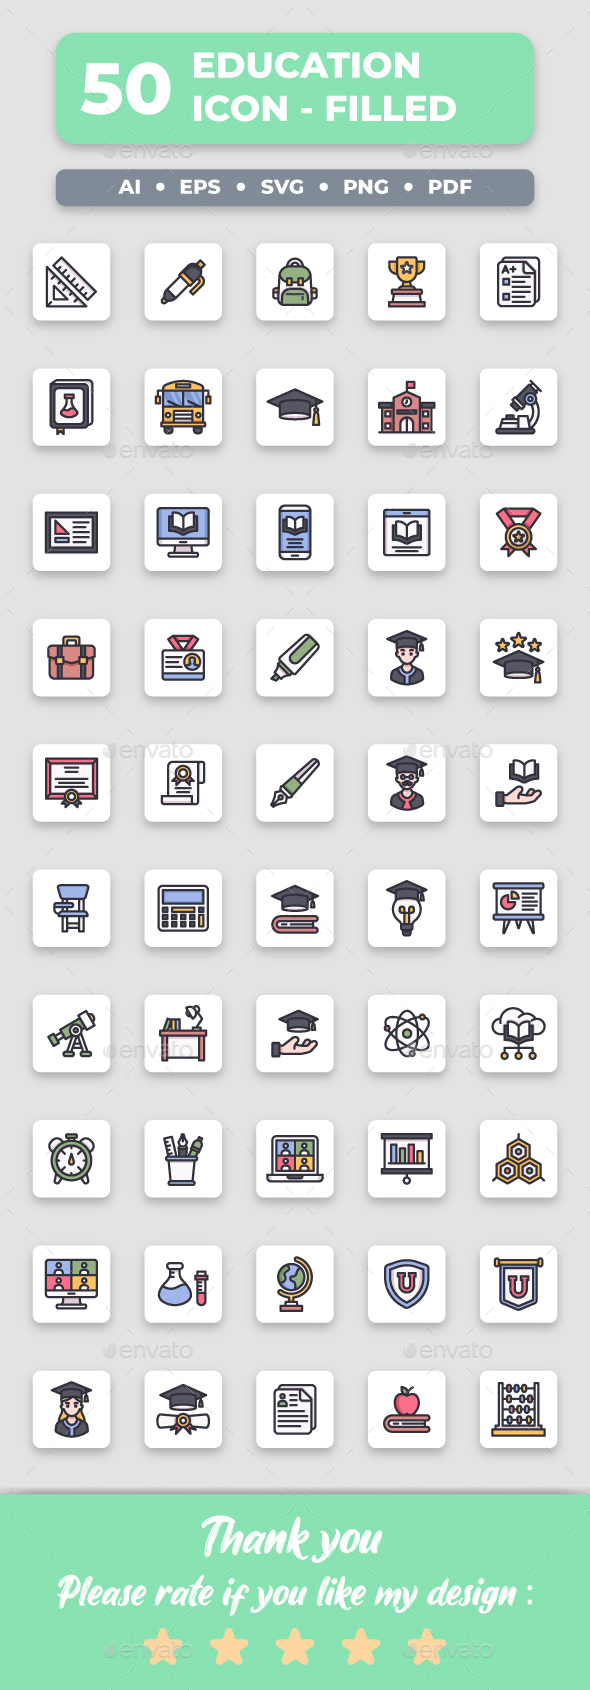 Education - Filled Outline Collection Icon Set